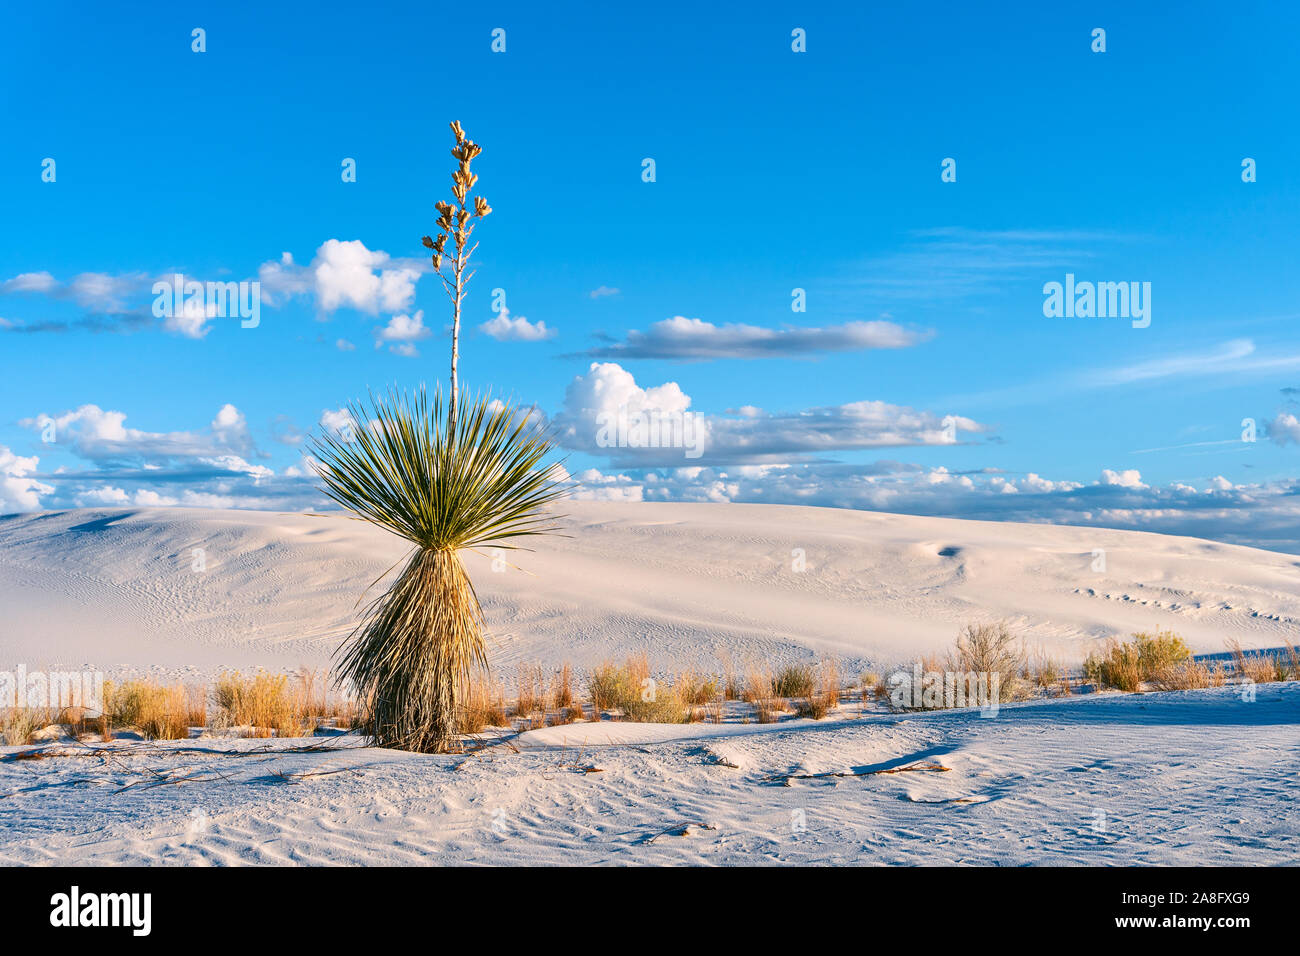 Scenic desert landscape with a Soaptree Yucca against sand dunes and blue sky at White Sands National Park, New Mexico, USA Stock Photo